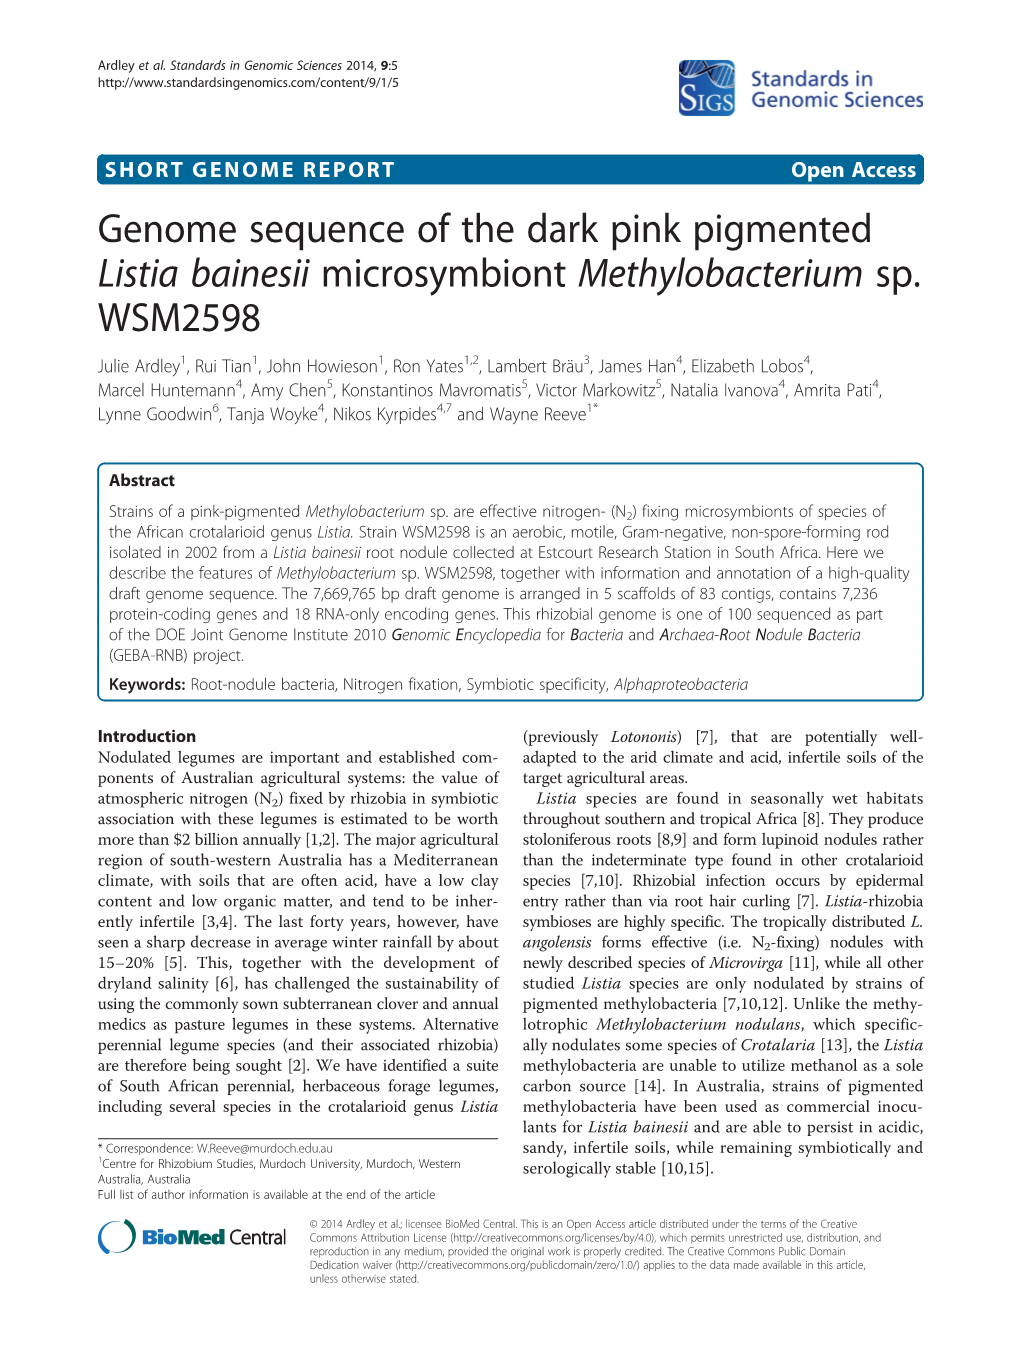 Genome Sequence of the Dark Pink Pigmented Listia Bainesii Microsymbiont Methylobacterium Sp